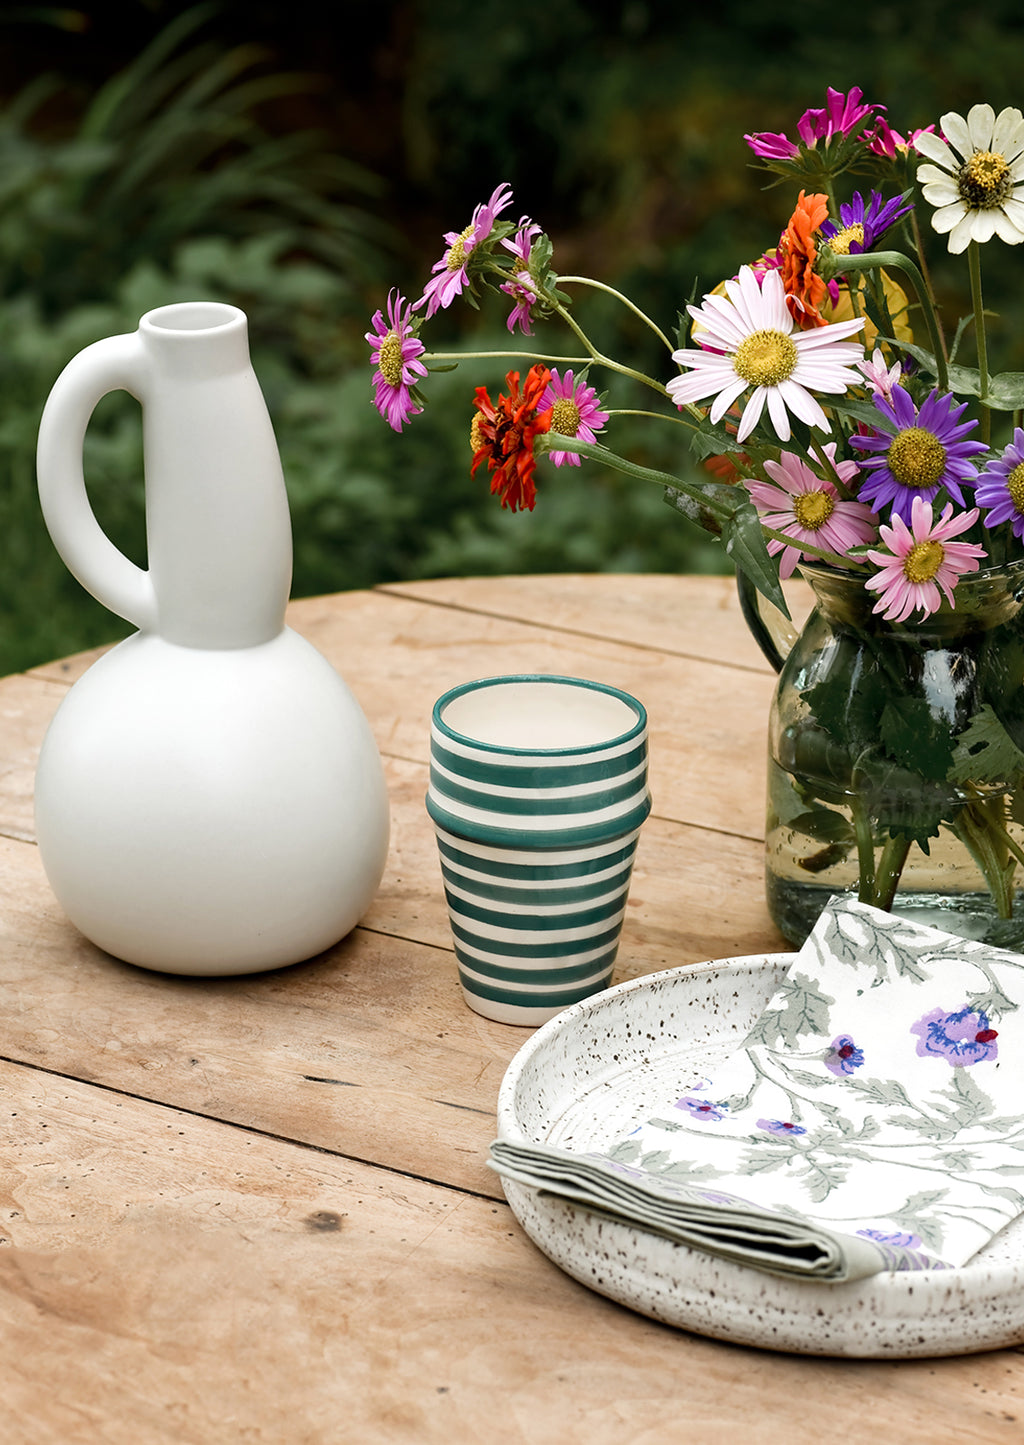 6: A table setting with pitcher, cup and flowers.